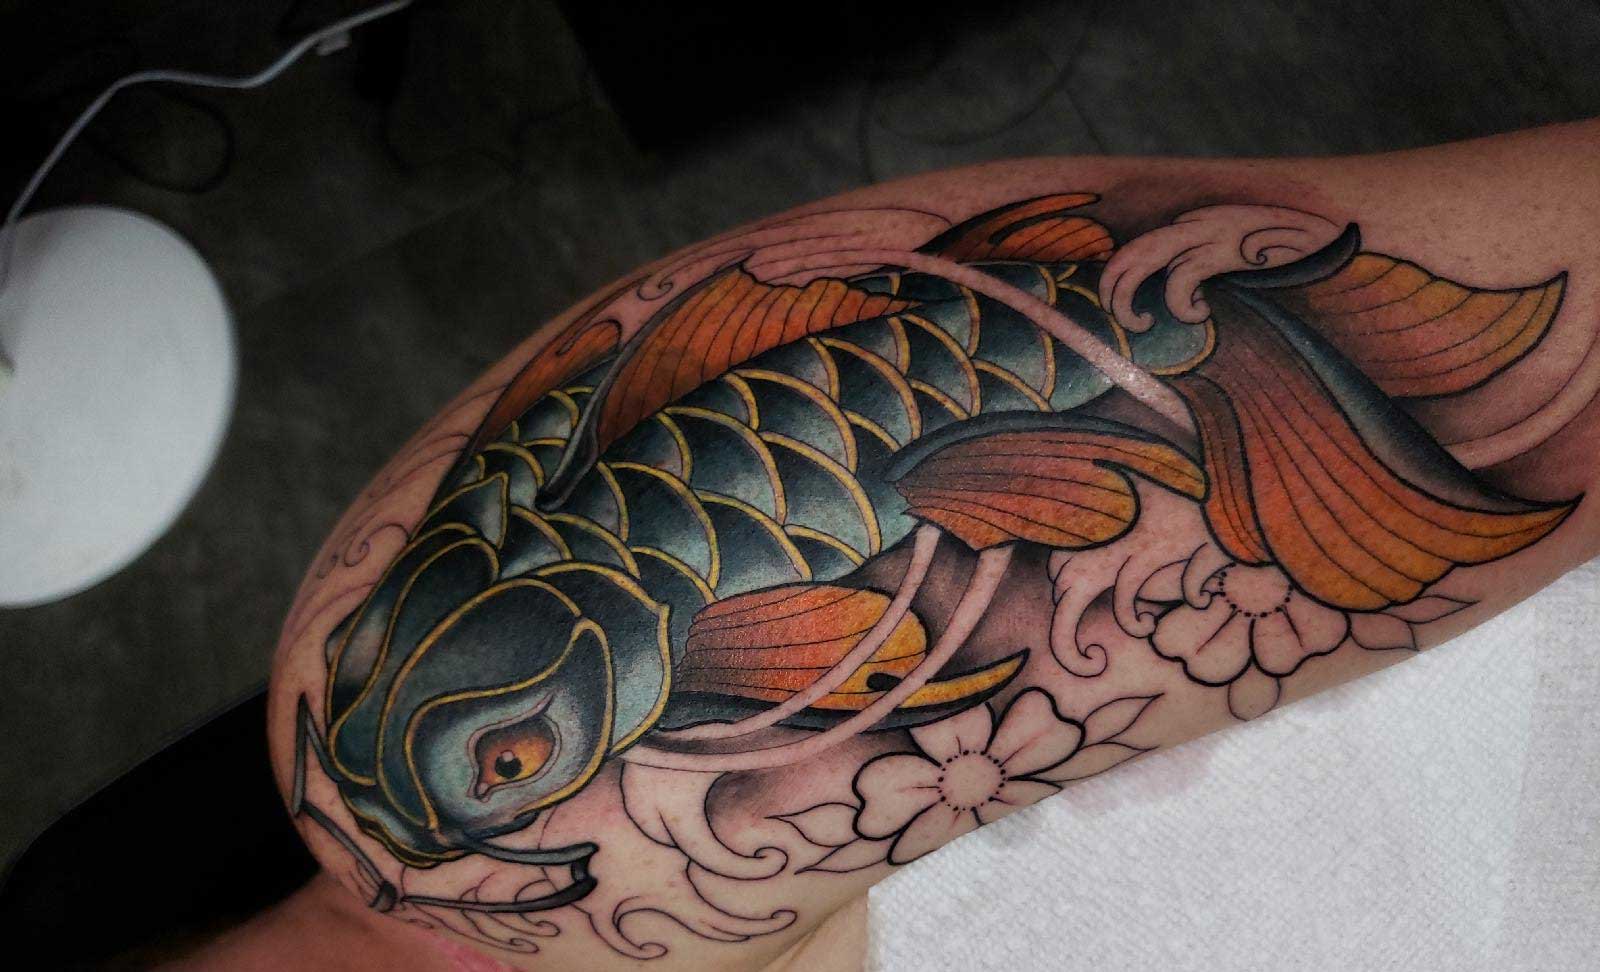 Fish Tattoo Meanings A Detailed Description with Photos